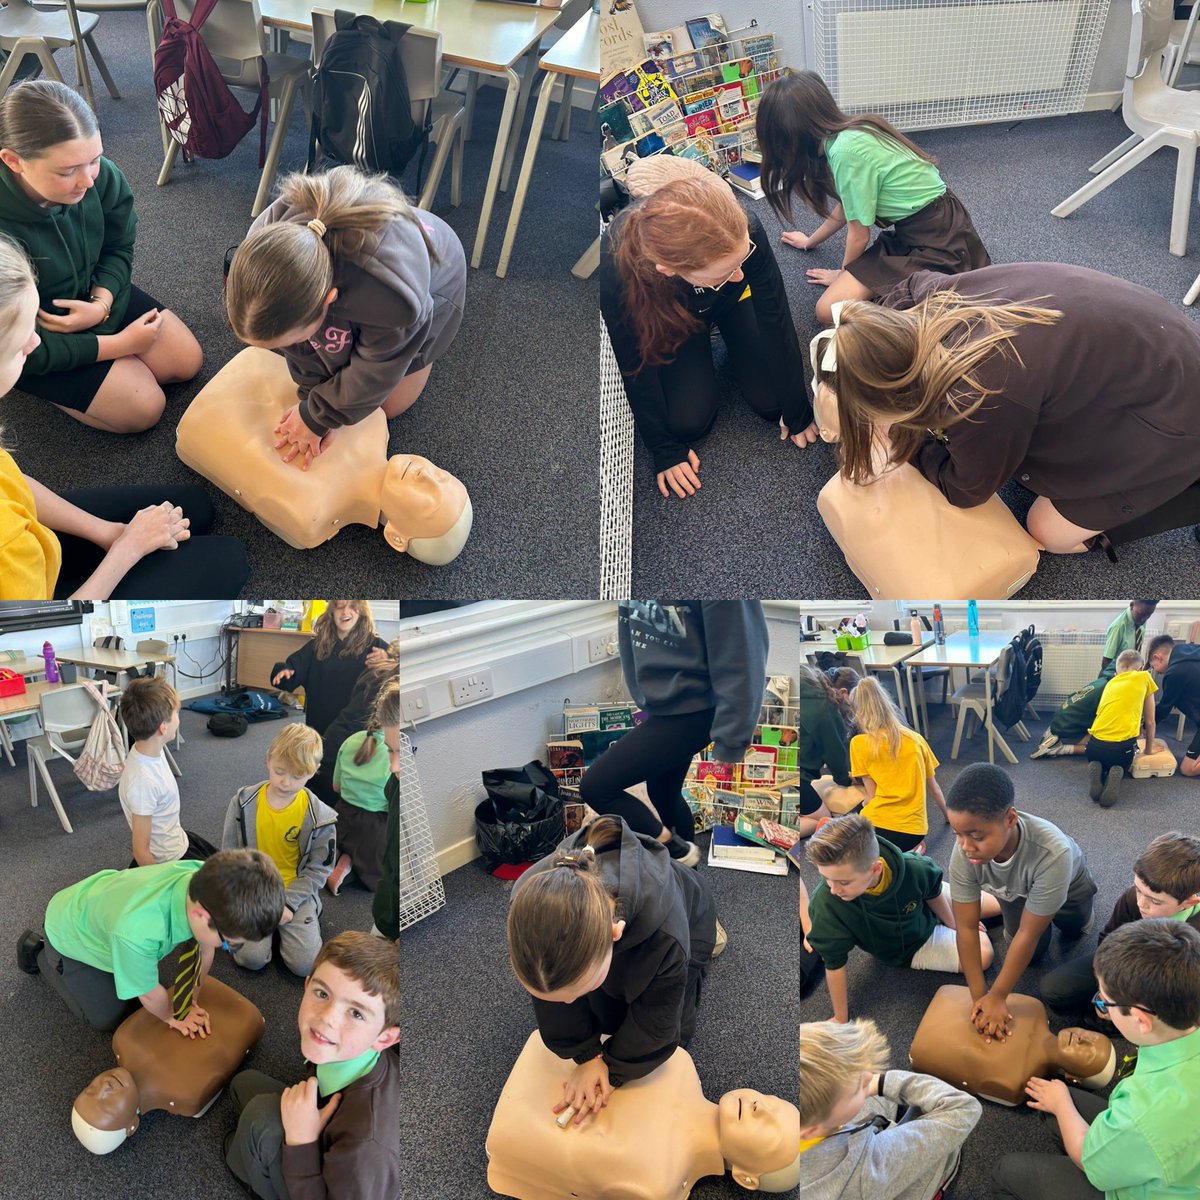 First and Second Level Life Skills Academy learning life saving and CPR skills ❤️‍🩹